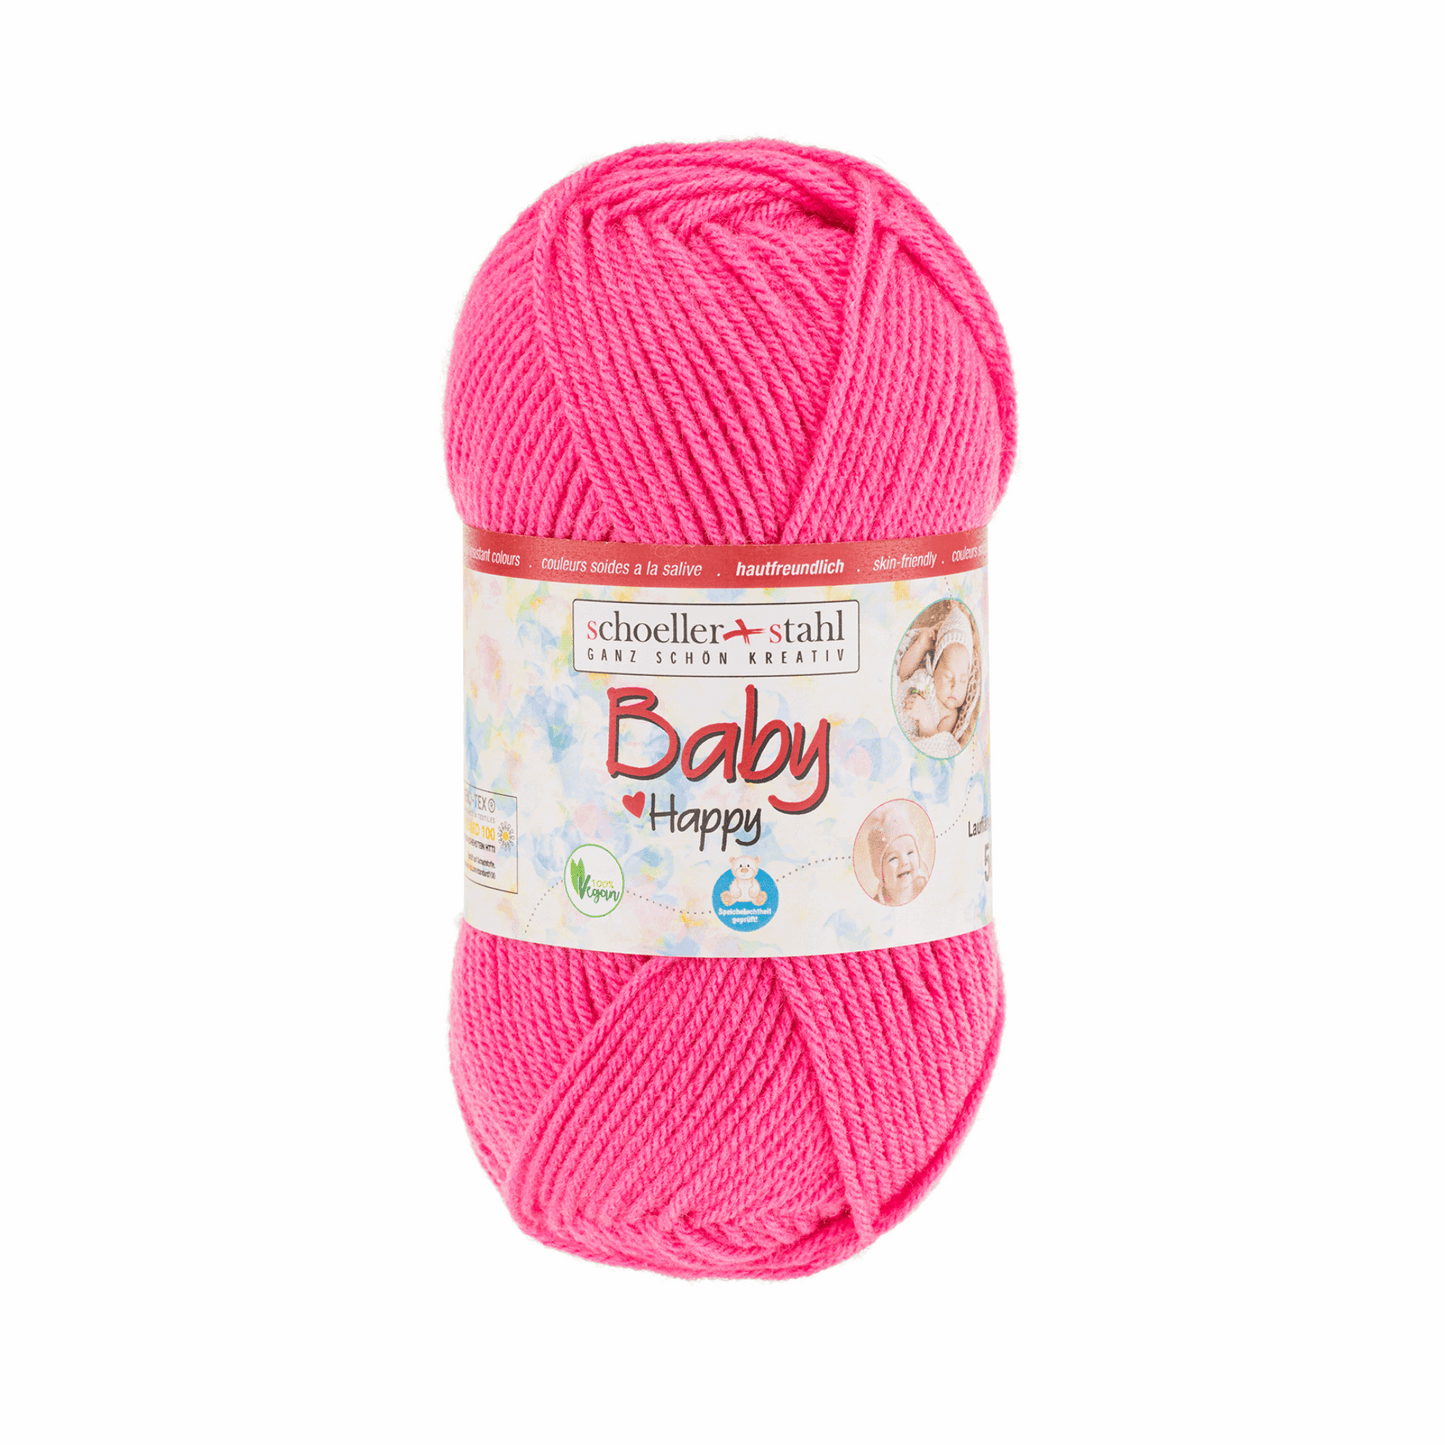 Baby happy 50g, 90279, Farbe 3, pink